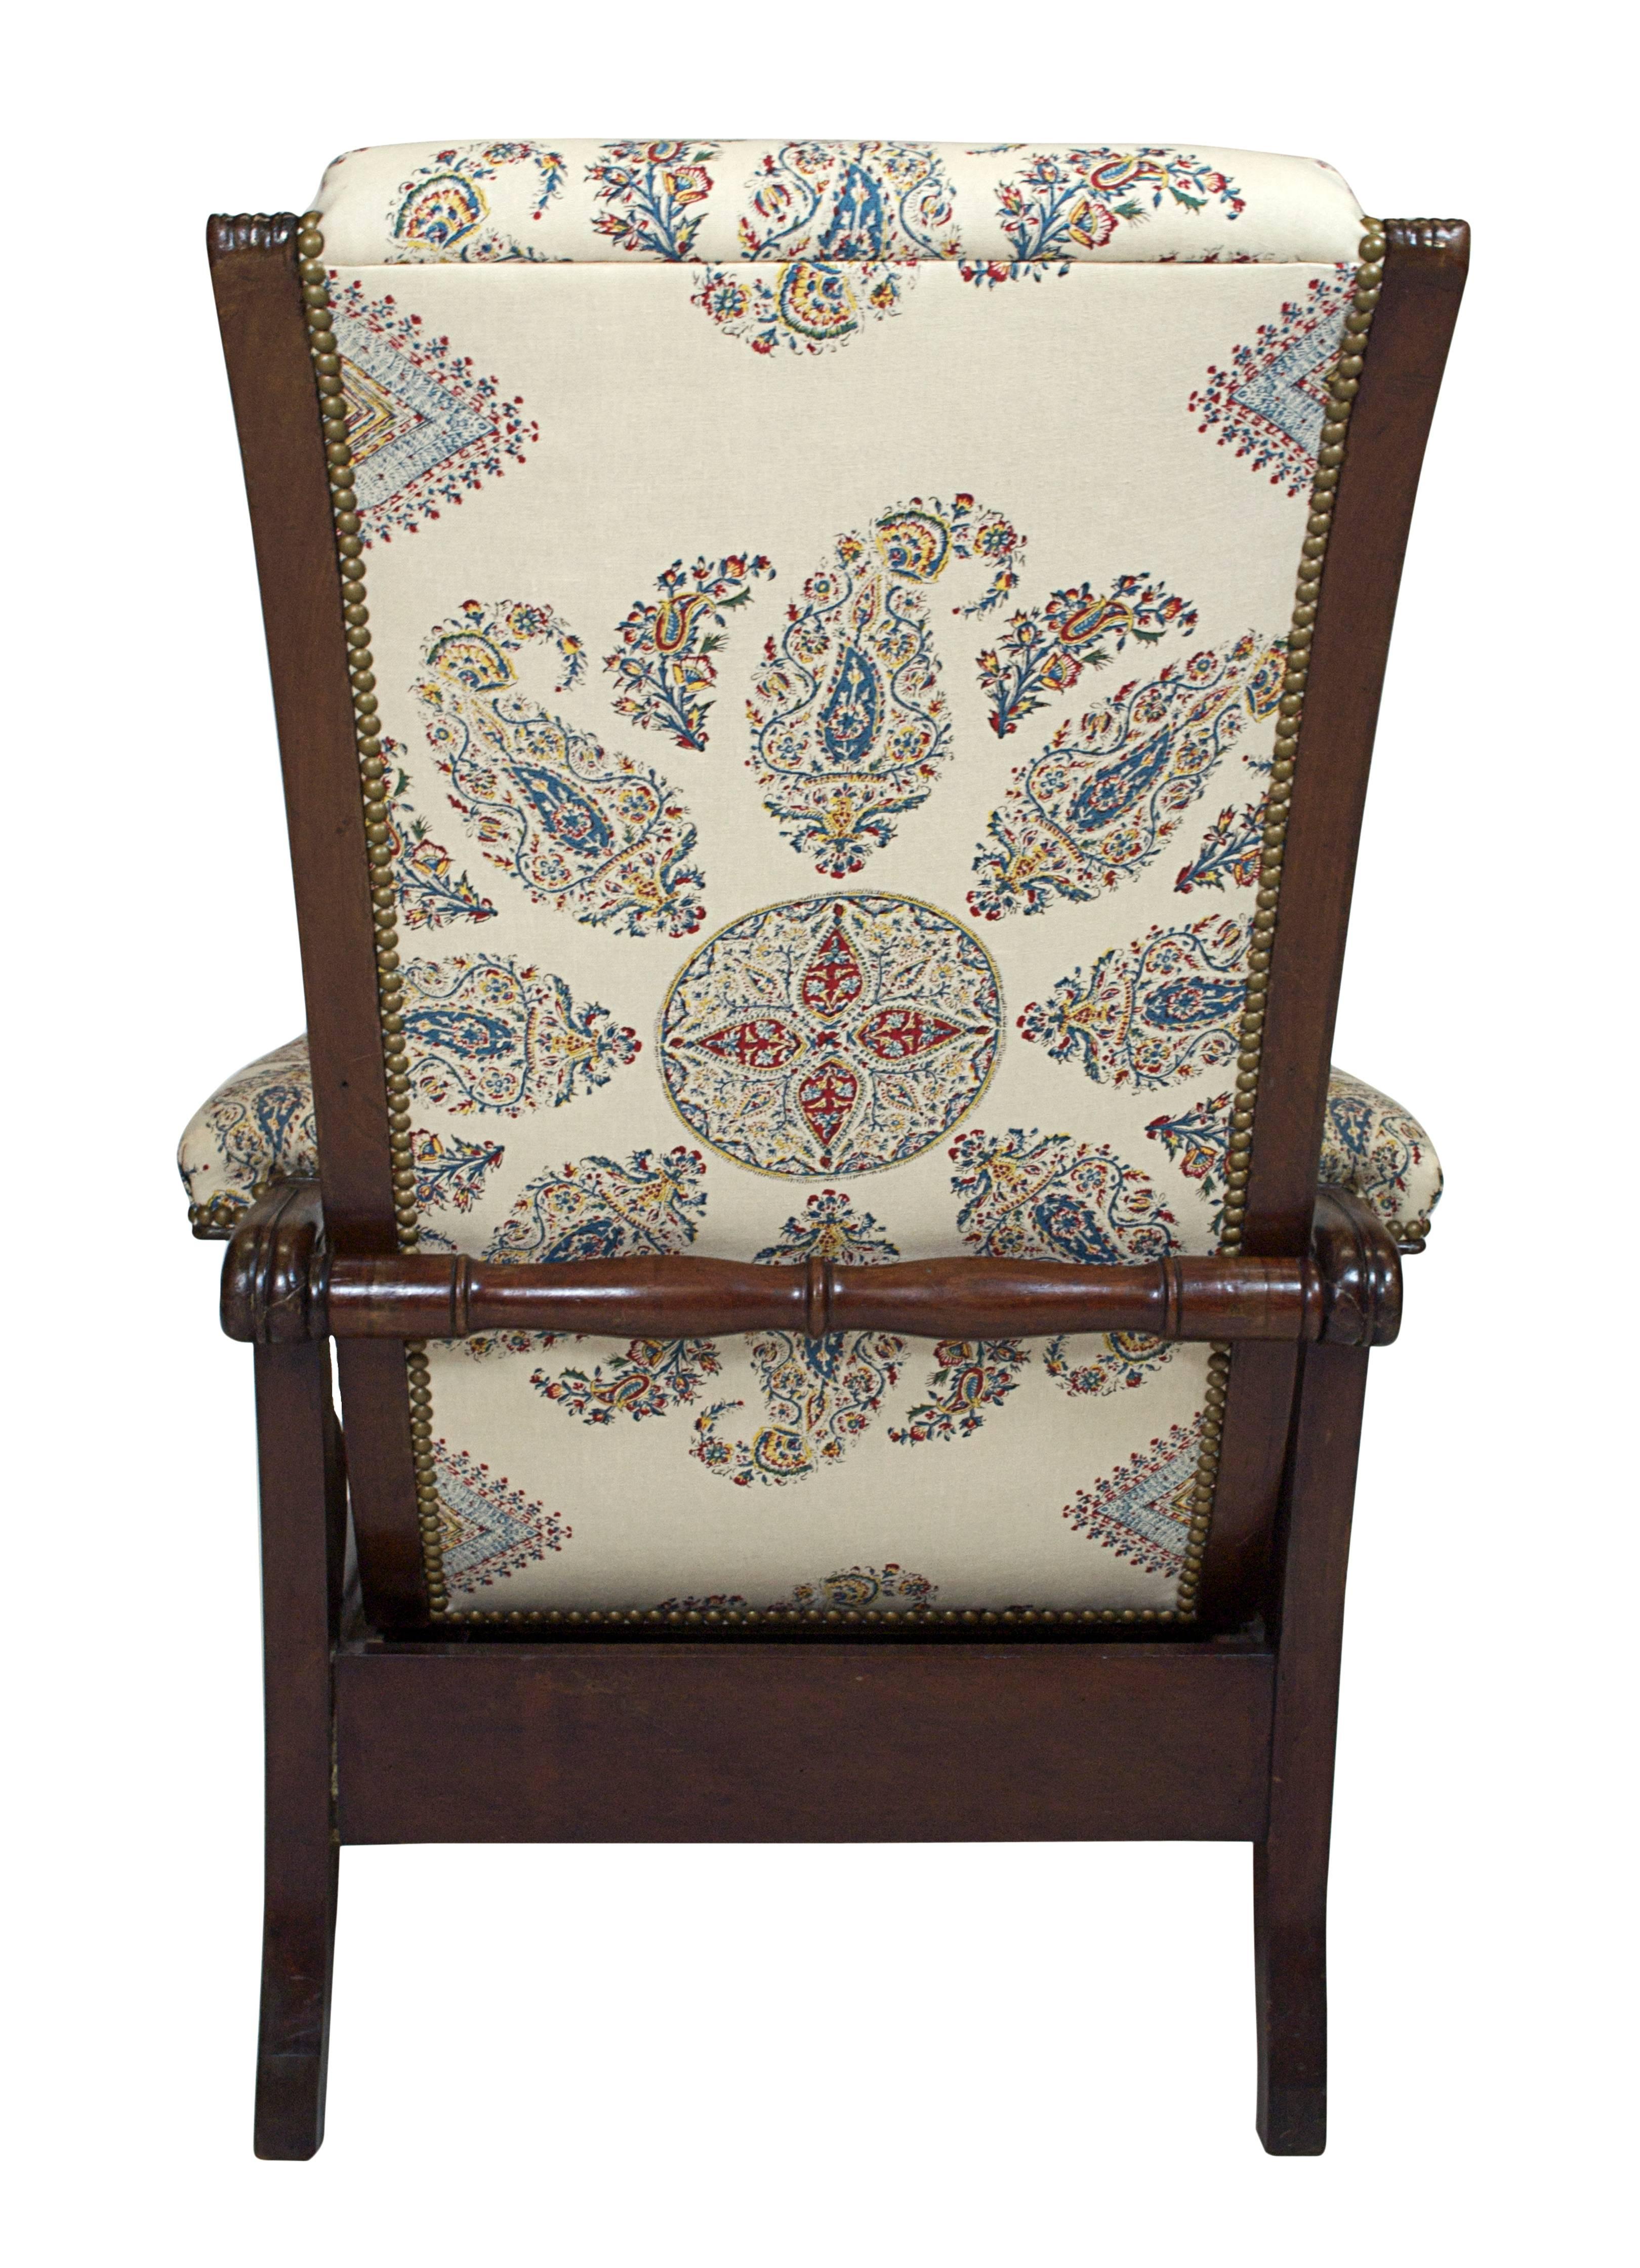 Mid-19th Century Late Empire Mahogany Armchair Featuring Hand-Printed Blue and Red Paisley Linen